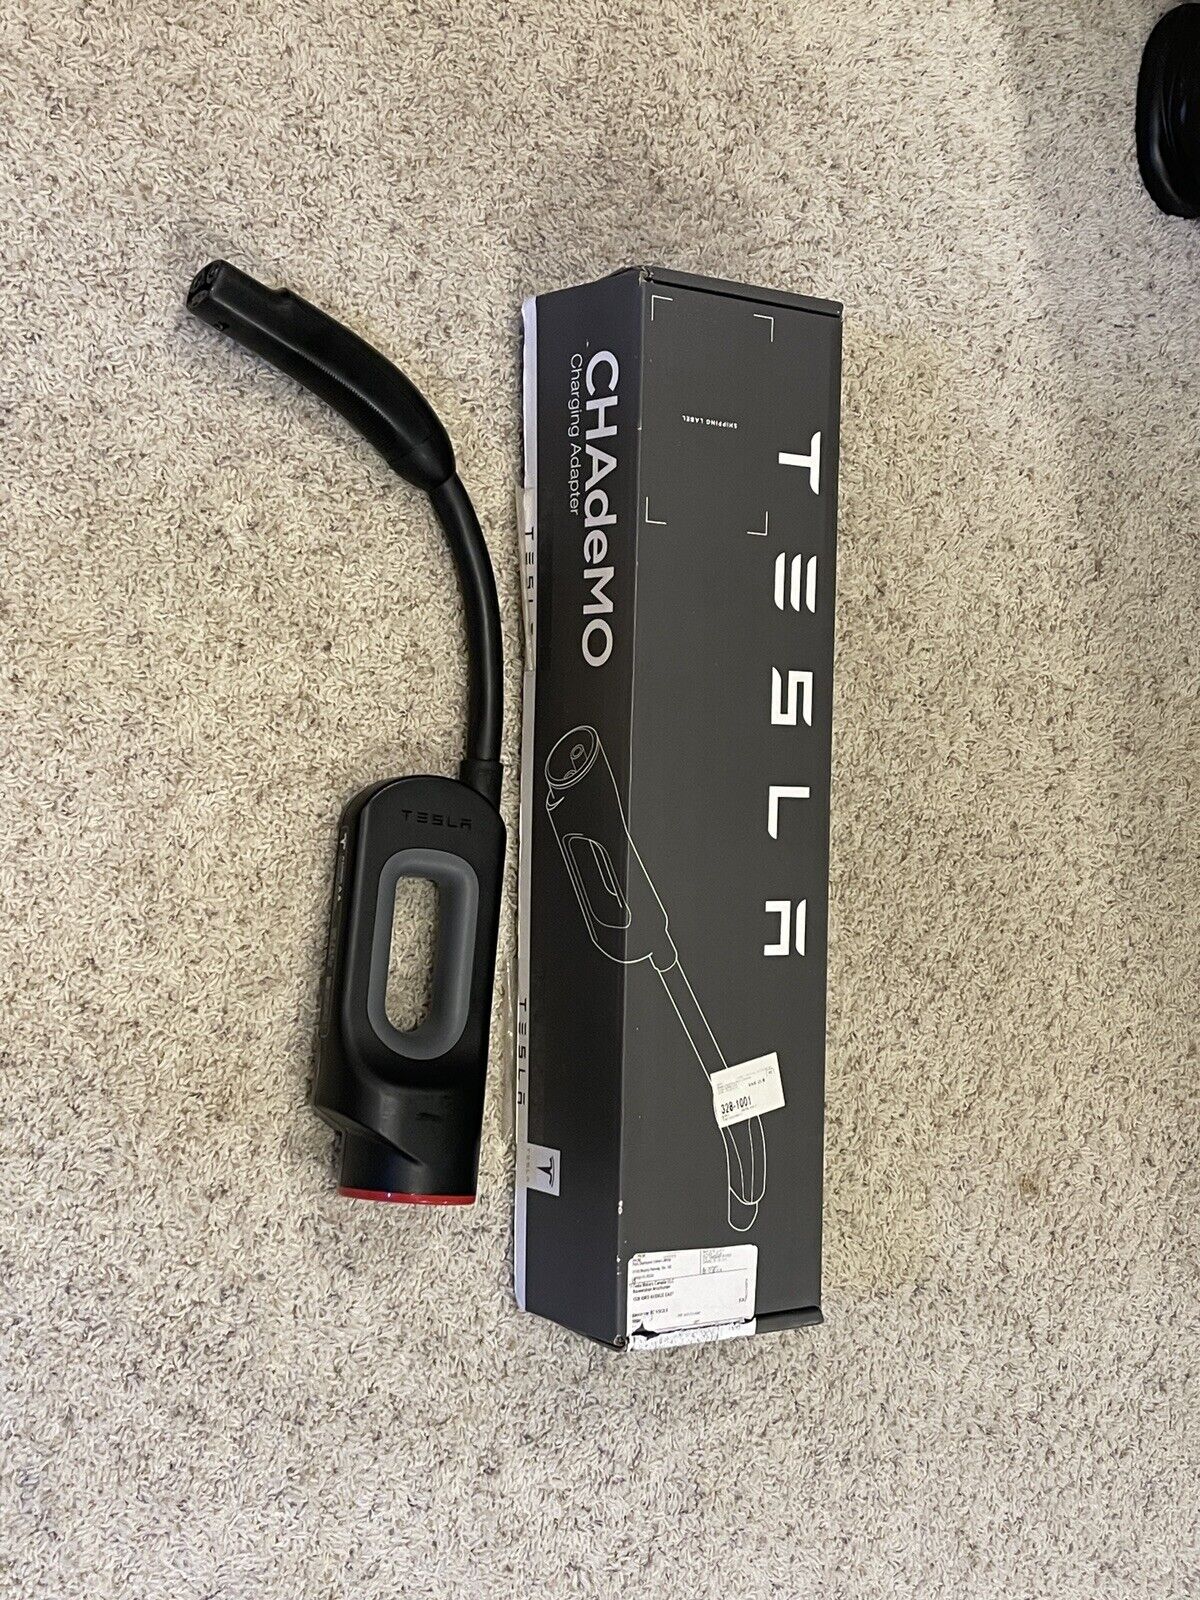 Tesla Chademo Adapter Charger w/Box (for S, X, 3, Y)